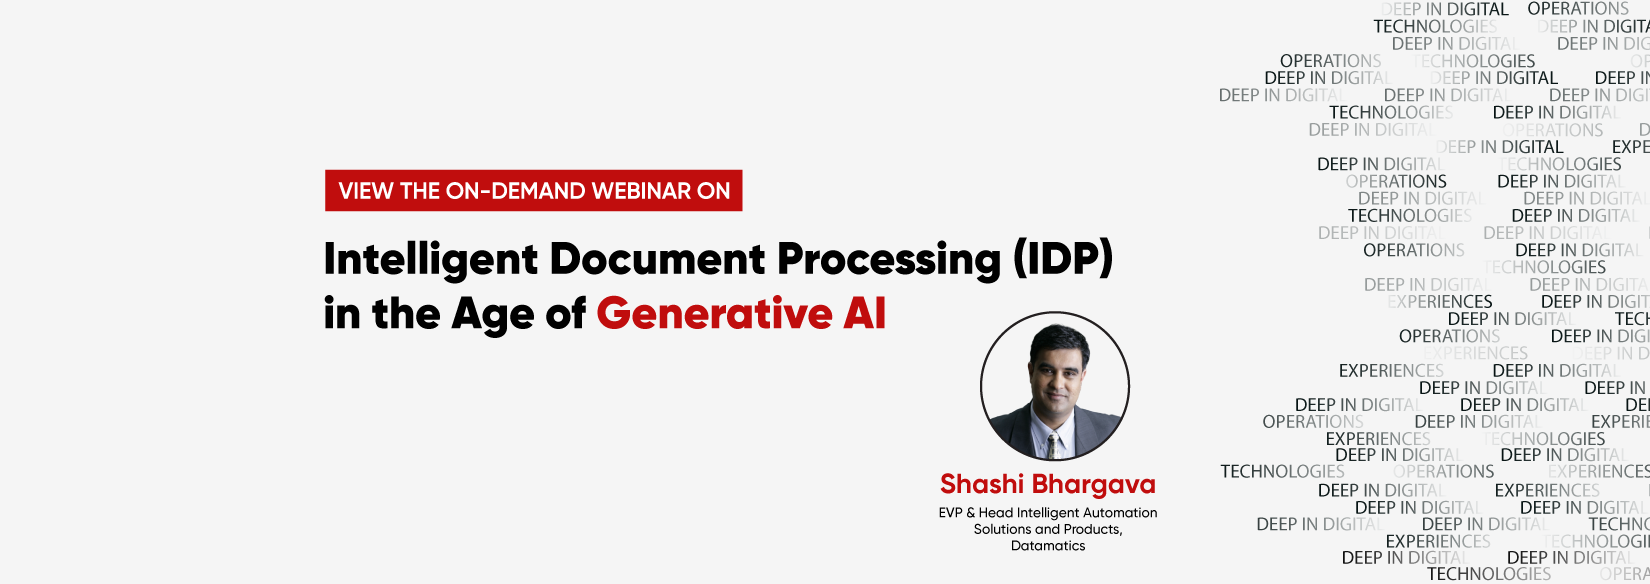 landing-page-on-demand-webinar-Intelligent-Document-Processing-(IDP)-in-the-Age-of-Generative-AI-1